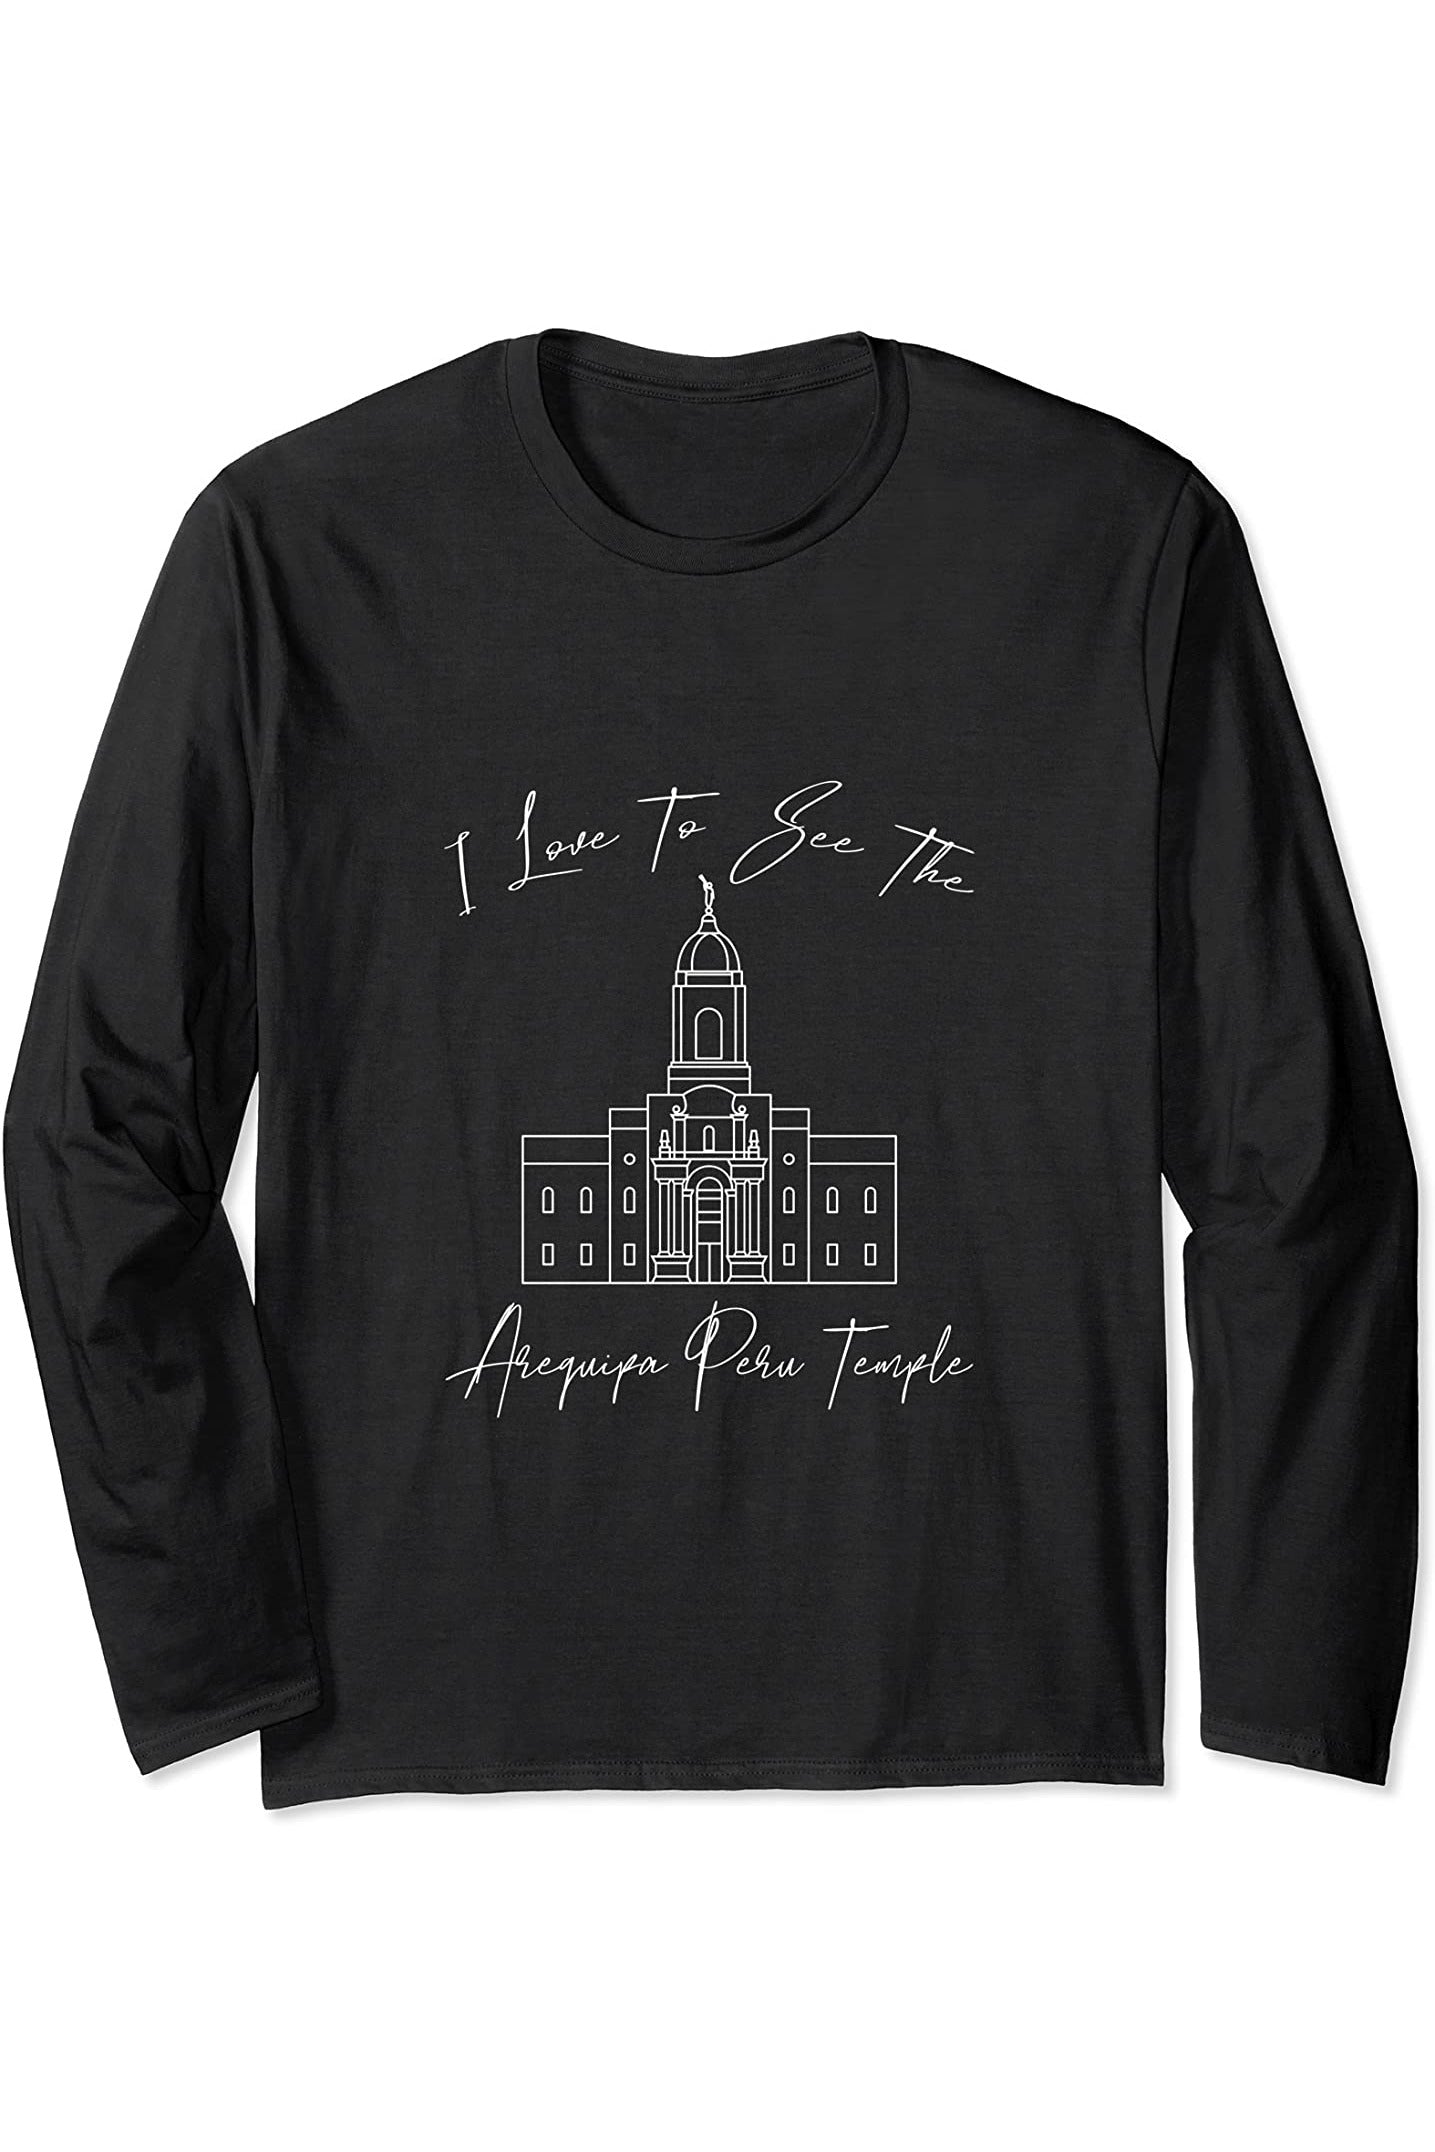 Arequipa Peru Temple Long Sleeve T-Shirt - Calligraphy Style (English) US